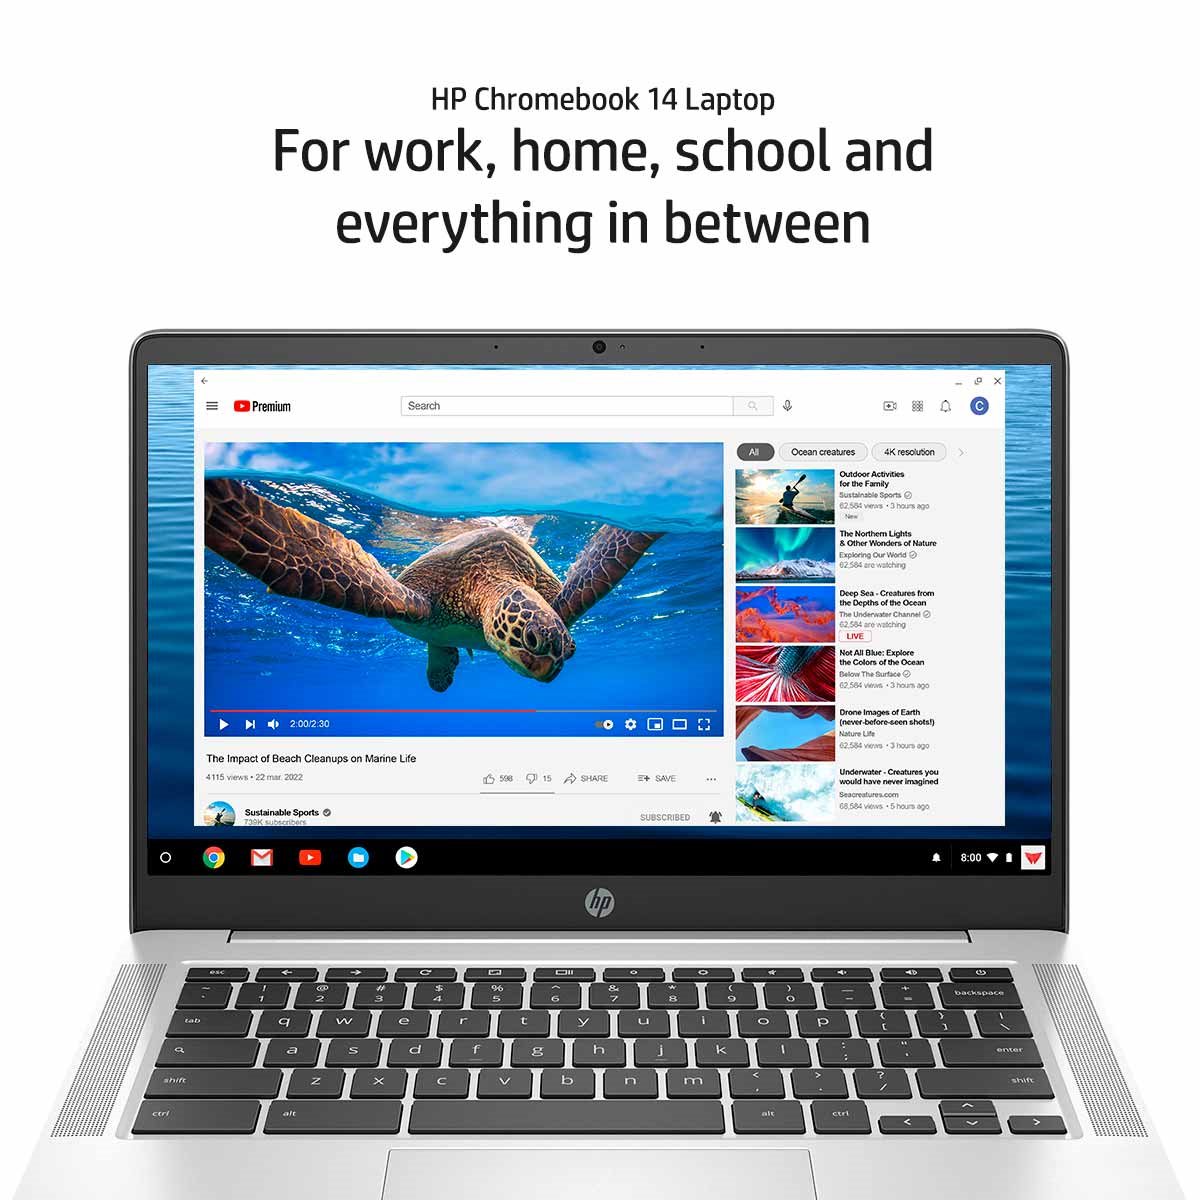 Silver Chromebook 14 shows YouTube app.